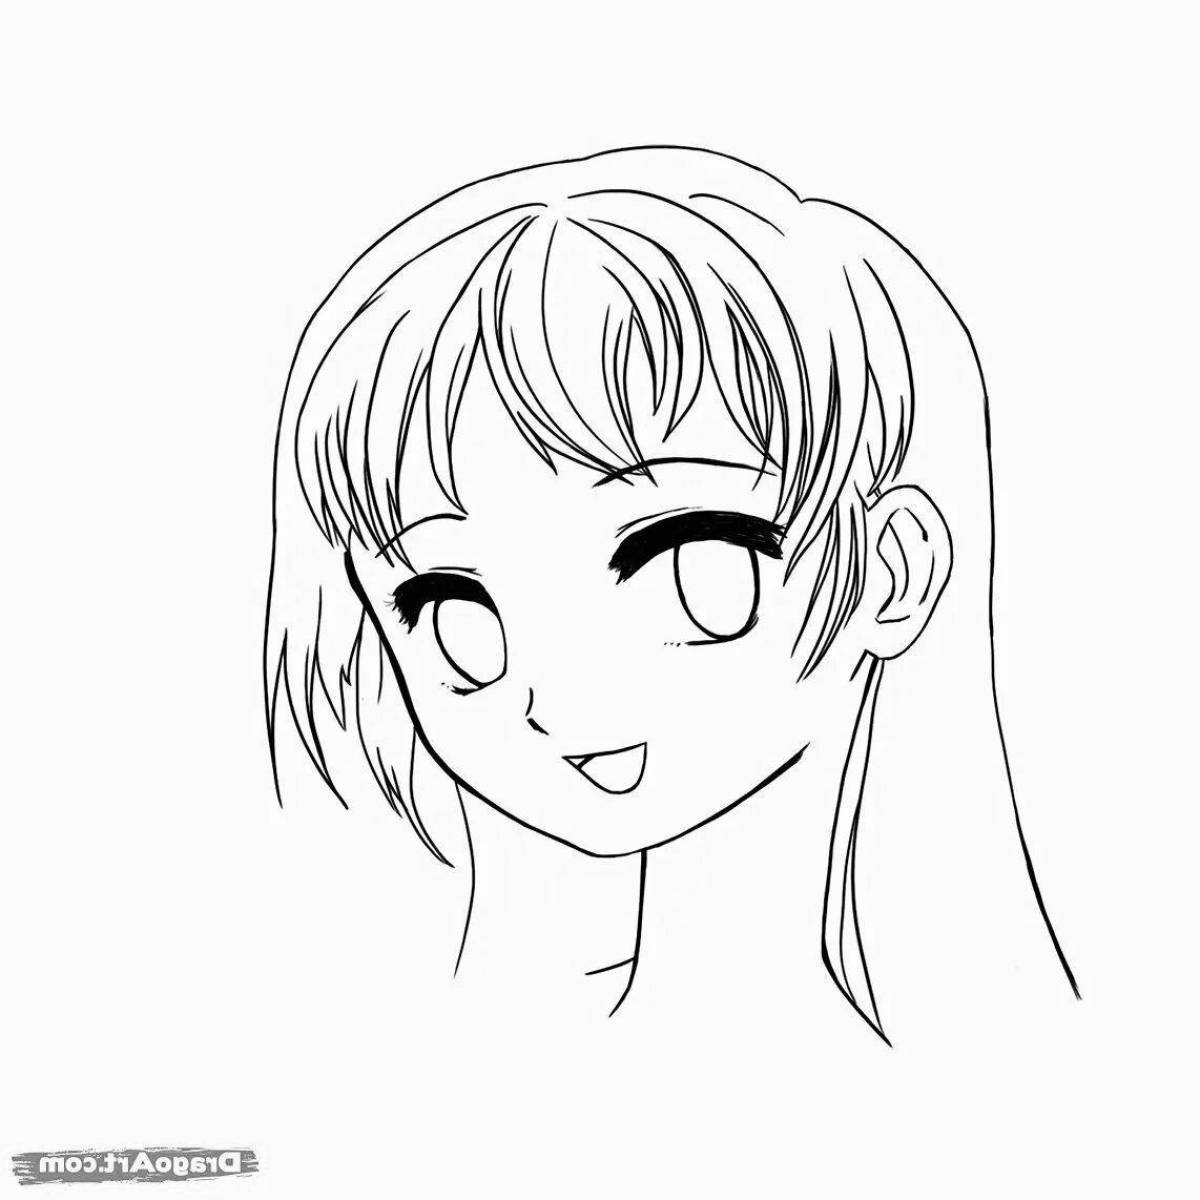 Exciting anime head coloring page